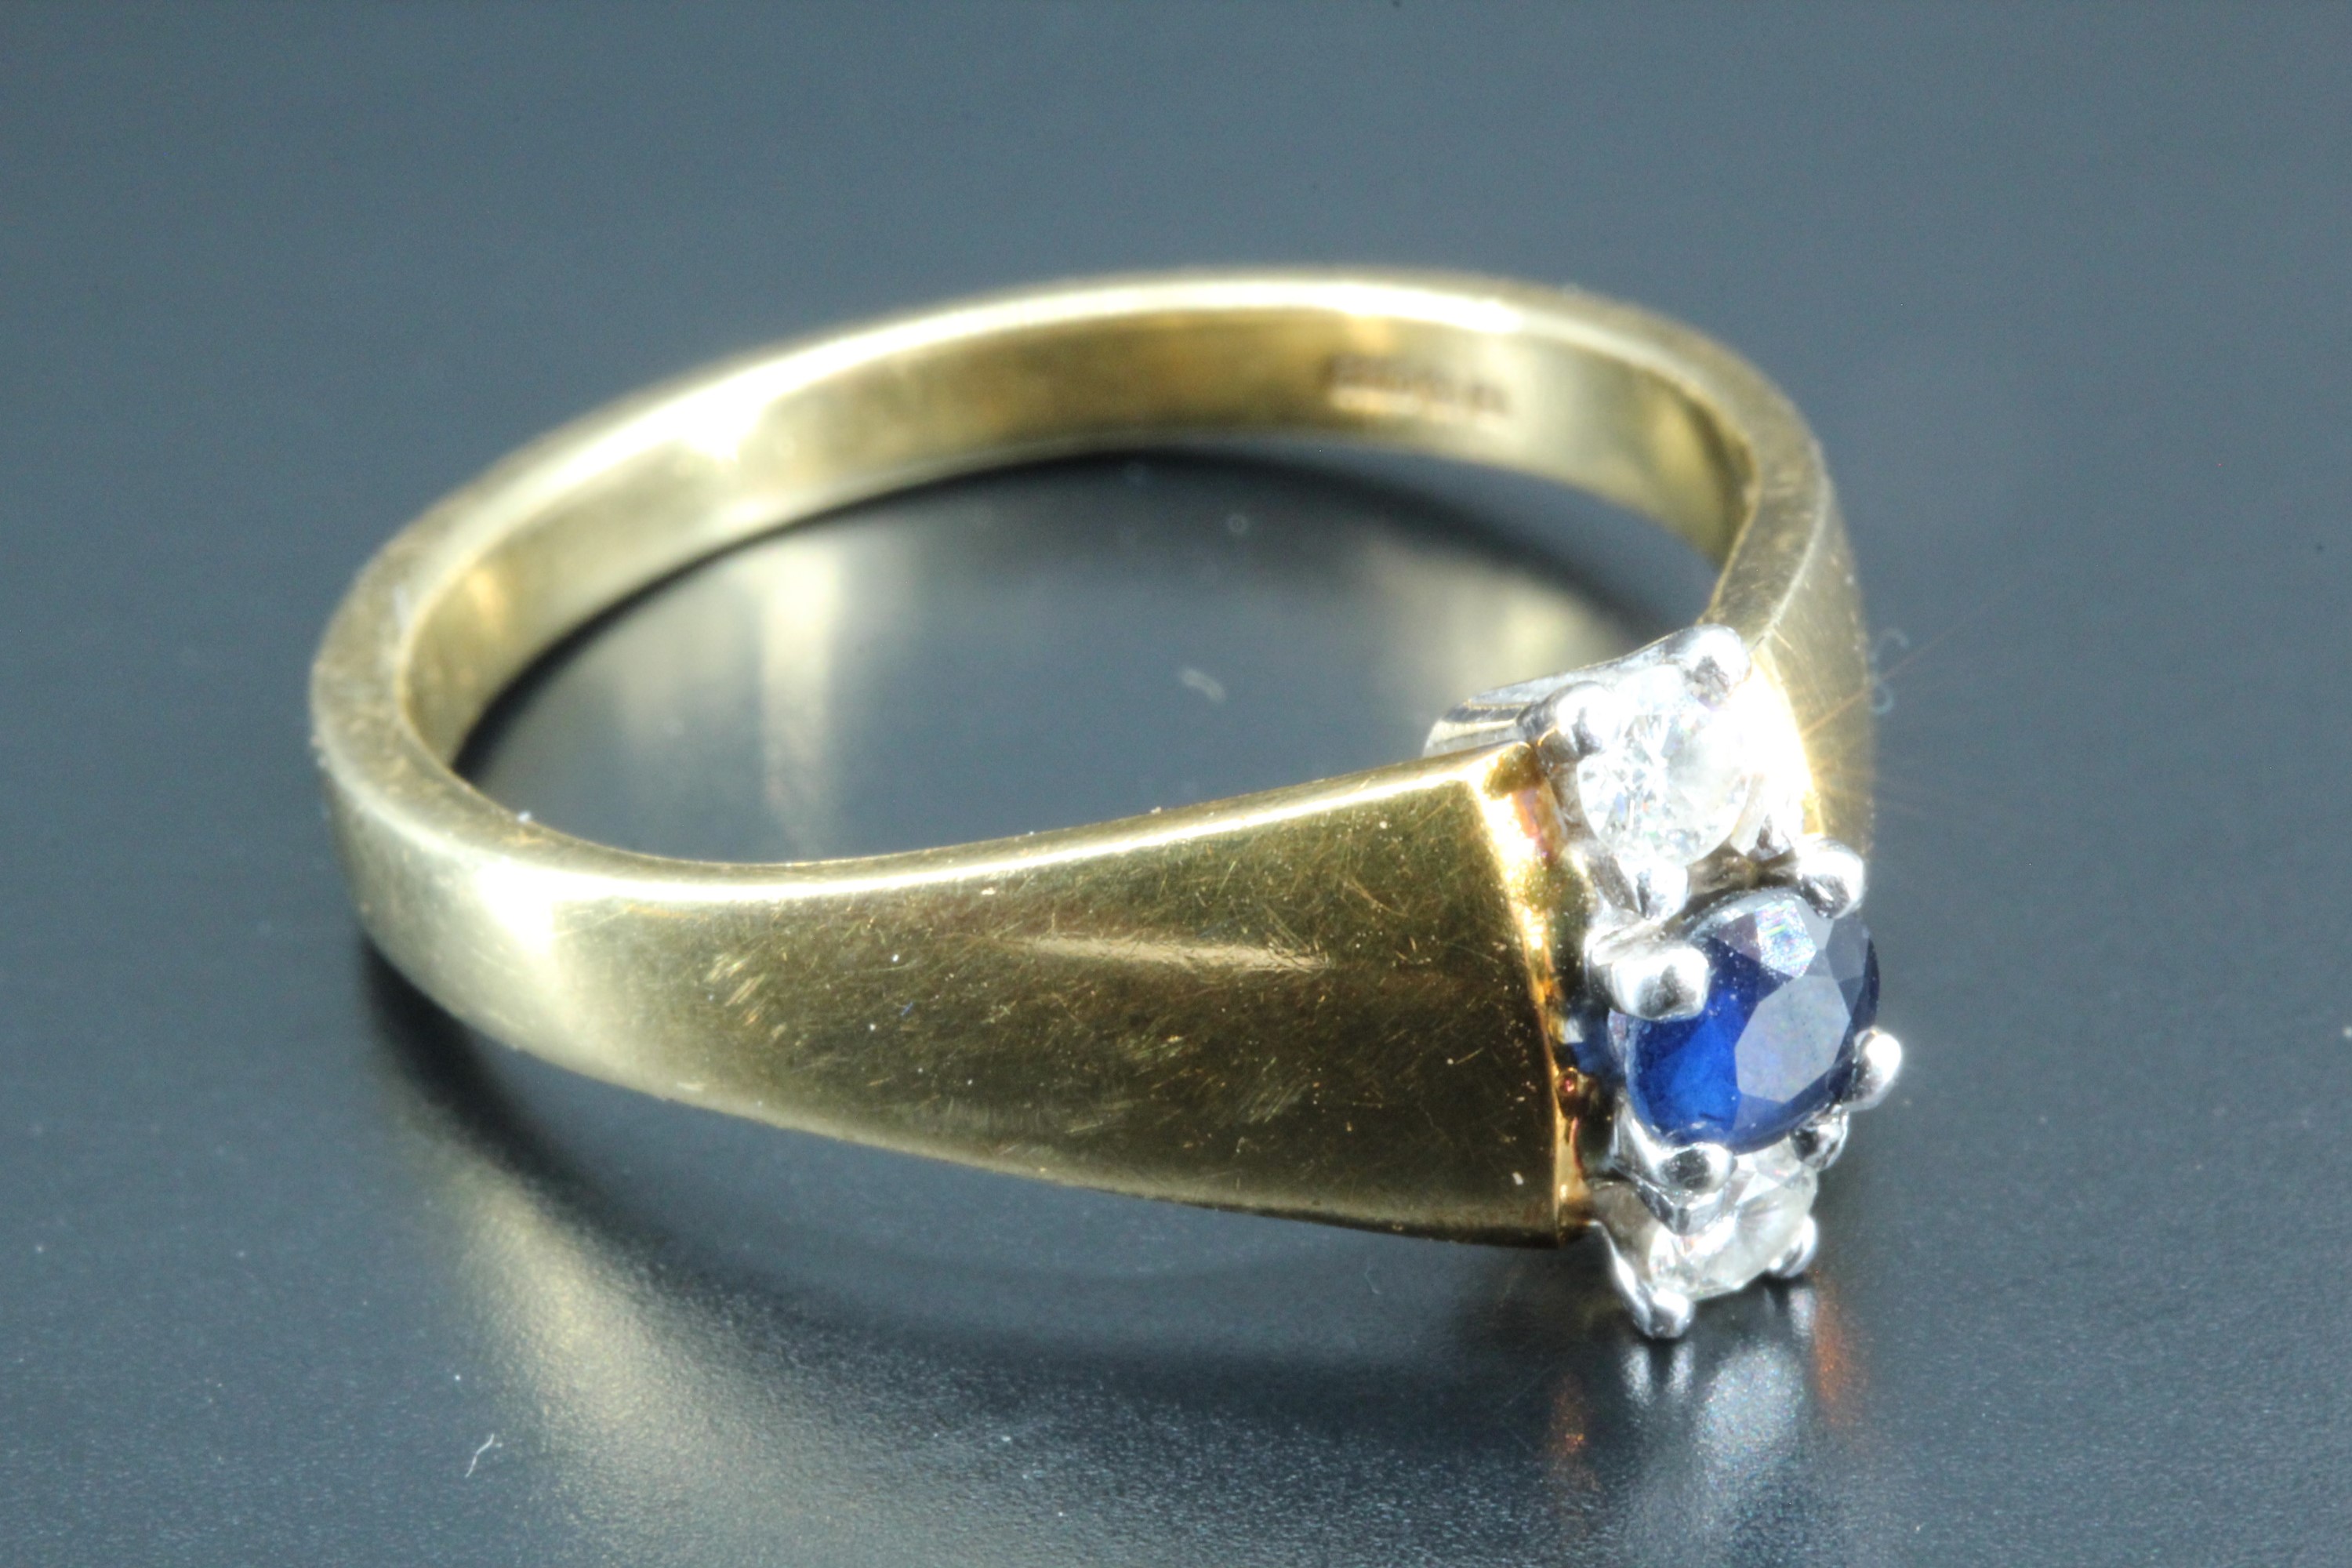 A contemporary diamond and sapphire ring, having a blue sapphire, approximately 0.1 carat, set